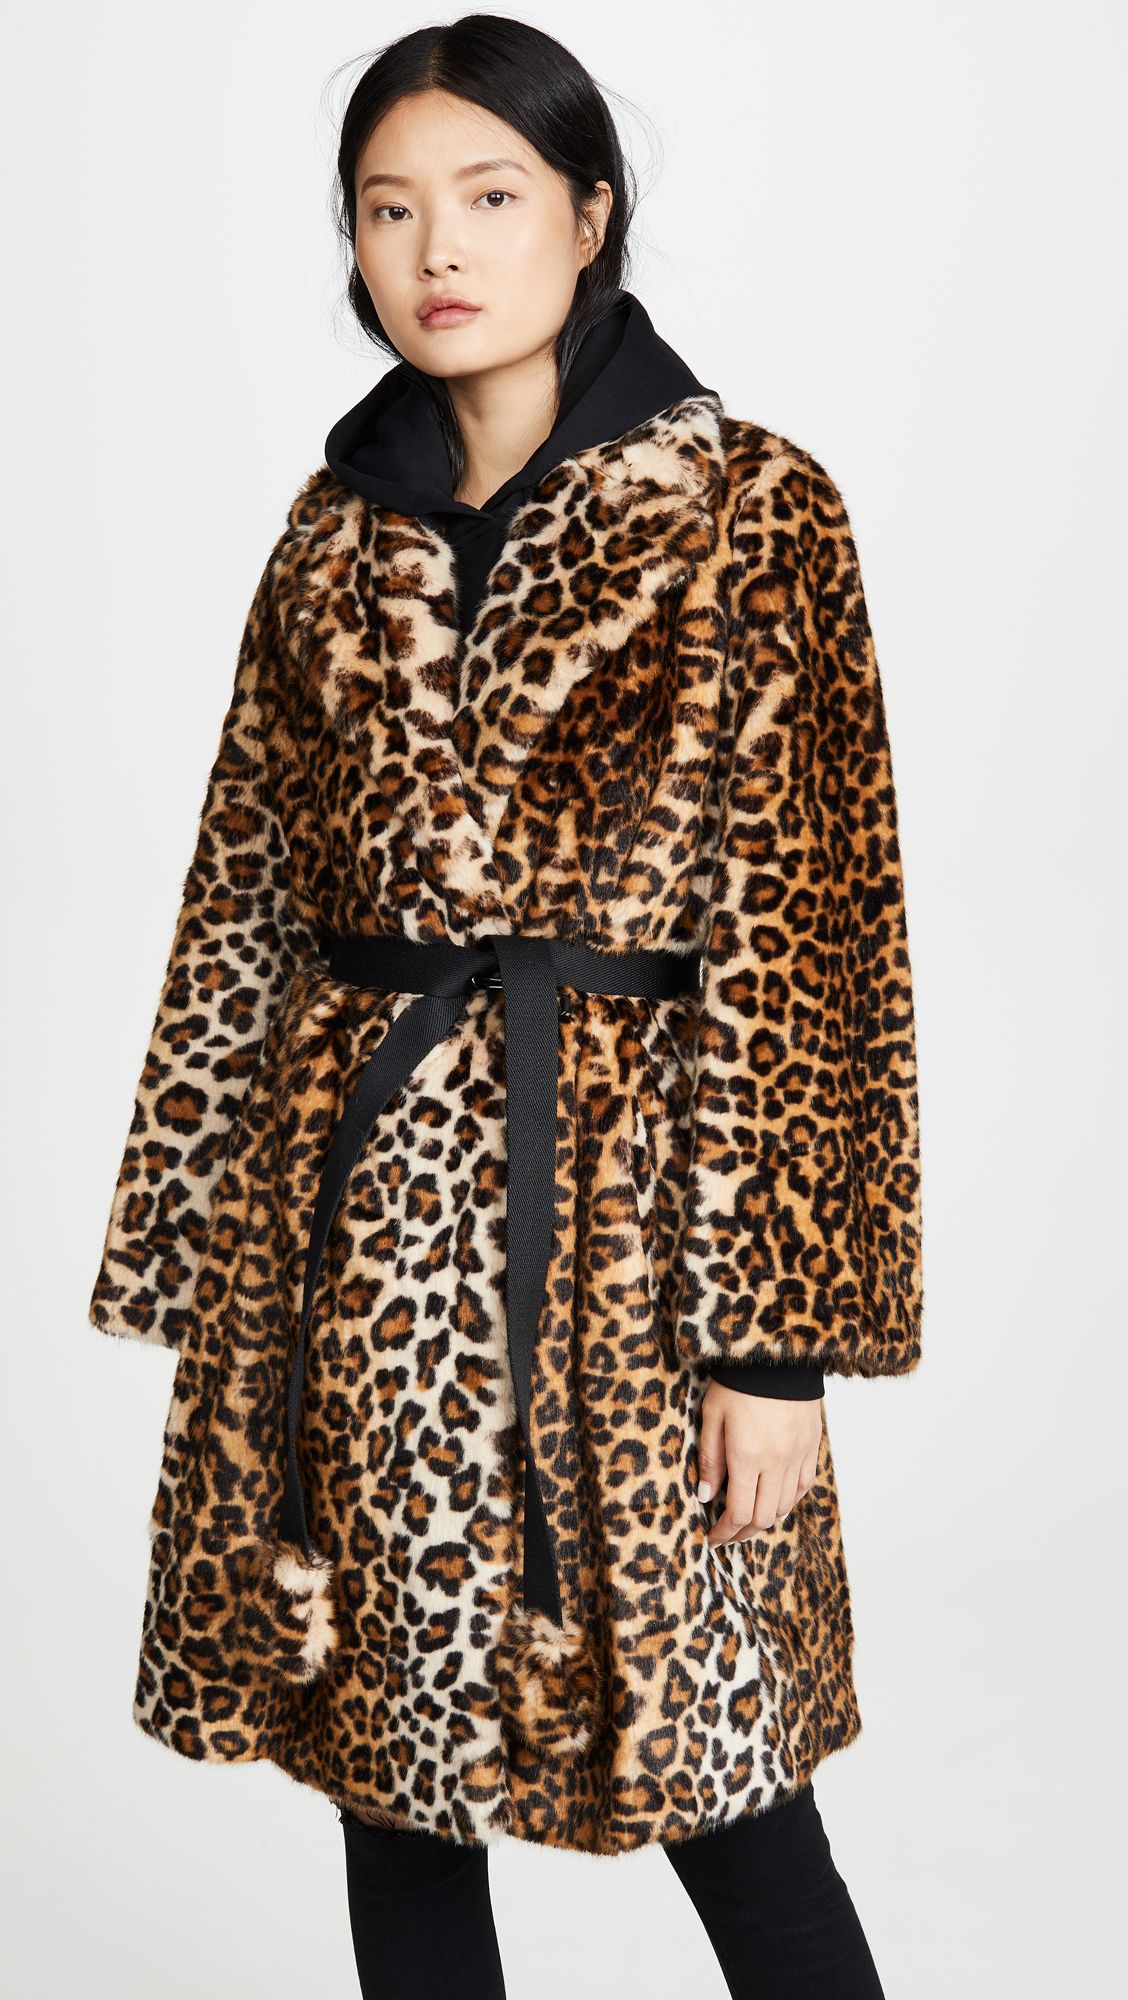 Anna Wintour Reveals the 4 Best Coat Trends Right Now | Who What Wear